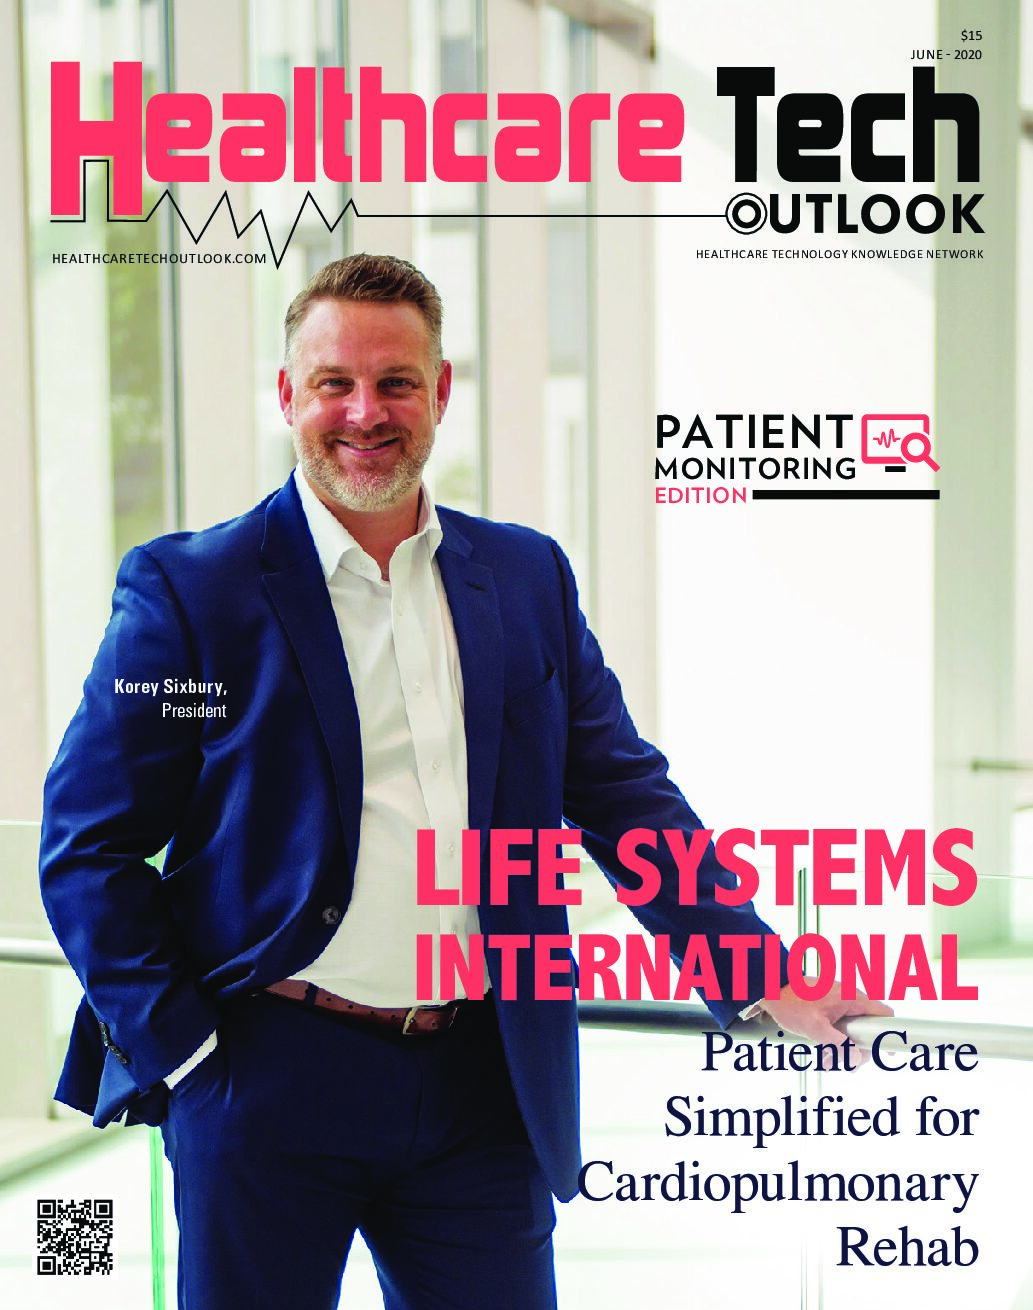 LSI Healthcare Tech Outlook Feature – High Resolution